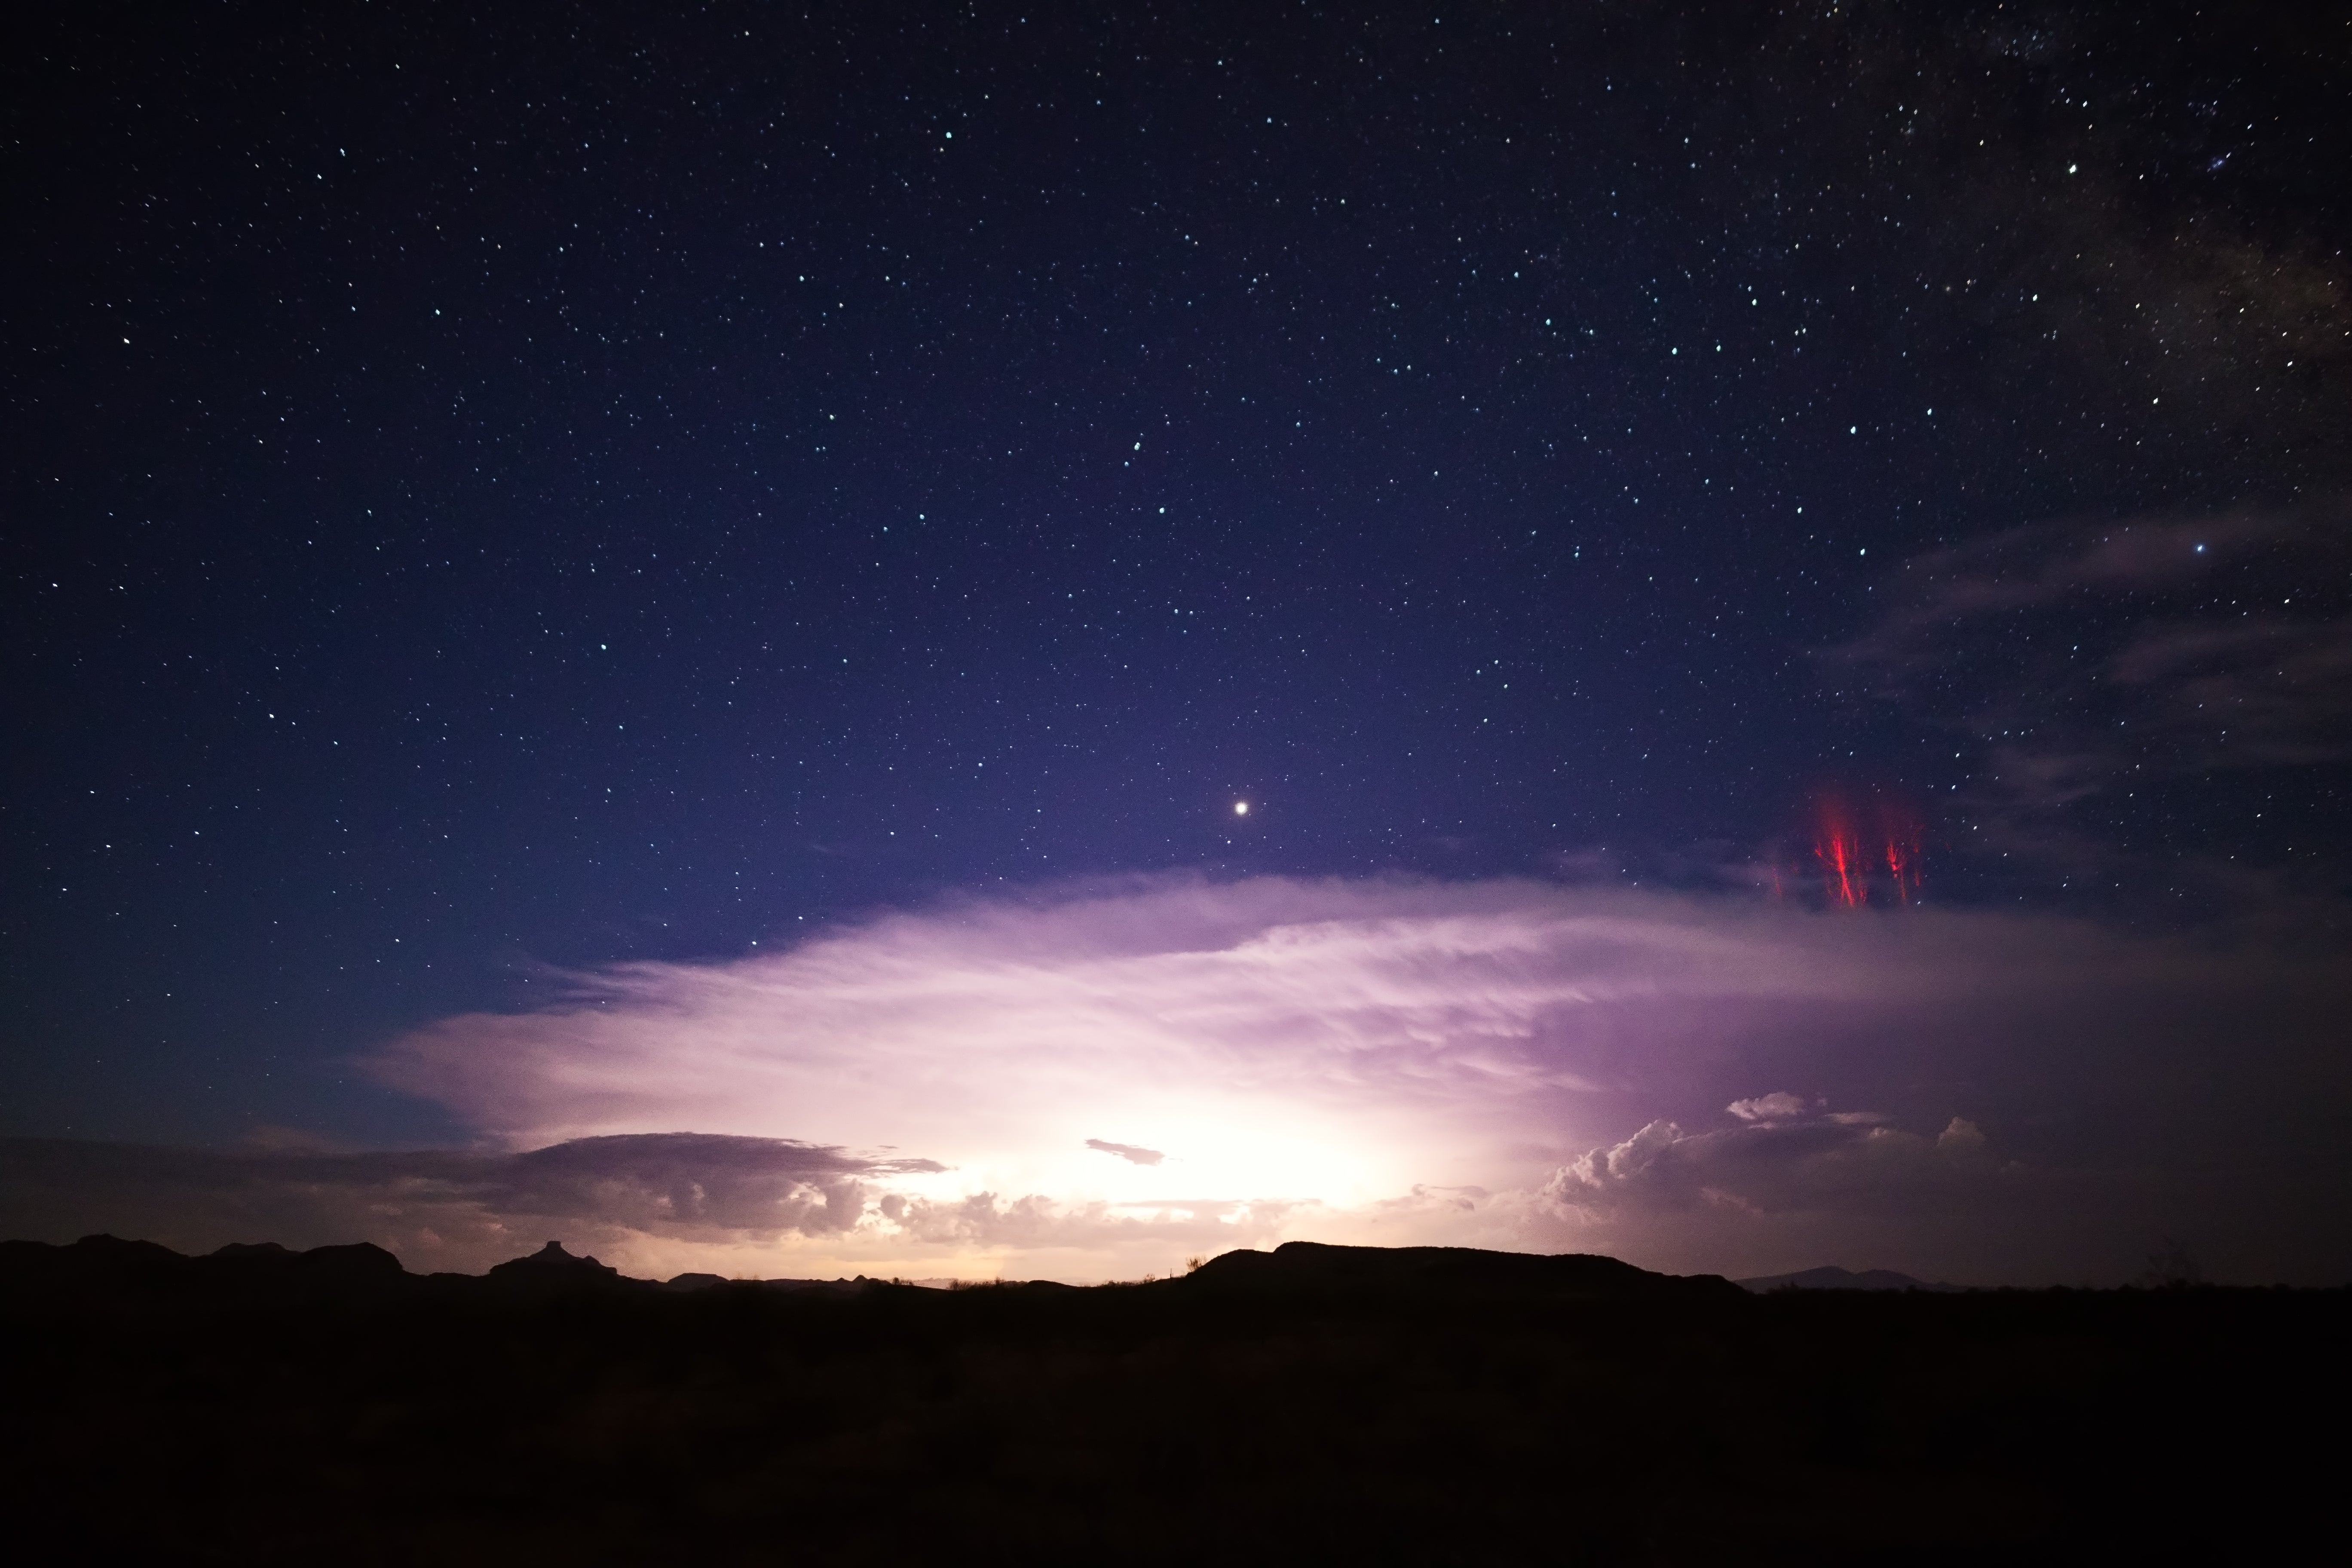 Sprite lightning, the reddish streaks on the right, as seen over a thunderstorm in Arizona. The phenomenon was also seen this week around the outer edges of Tropical Storm Nicole